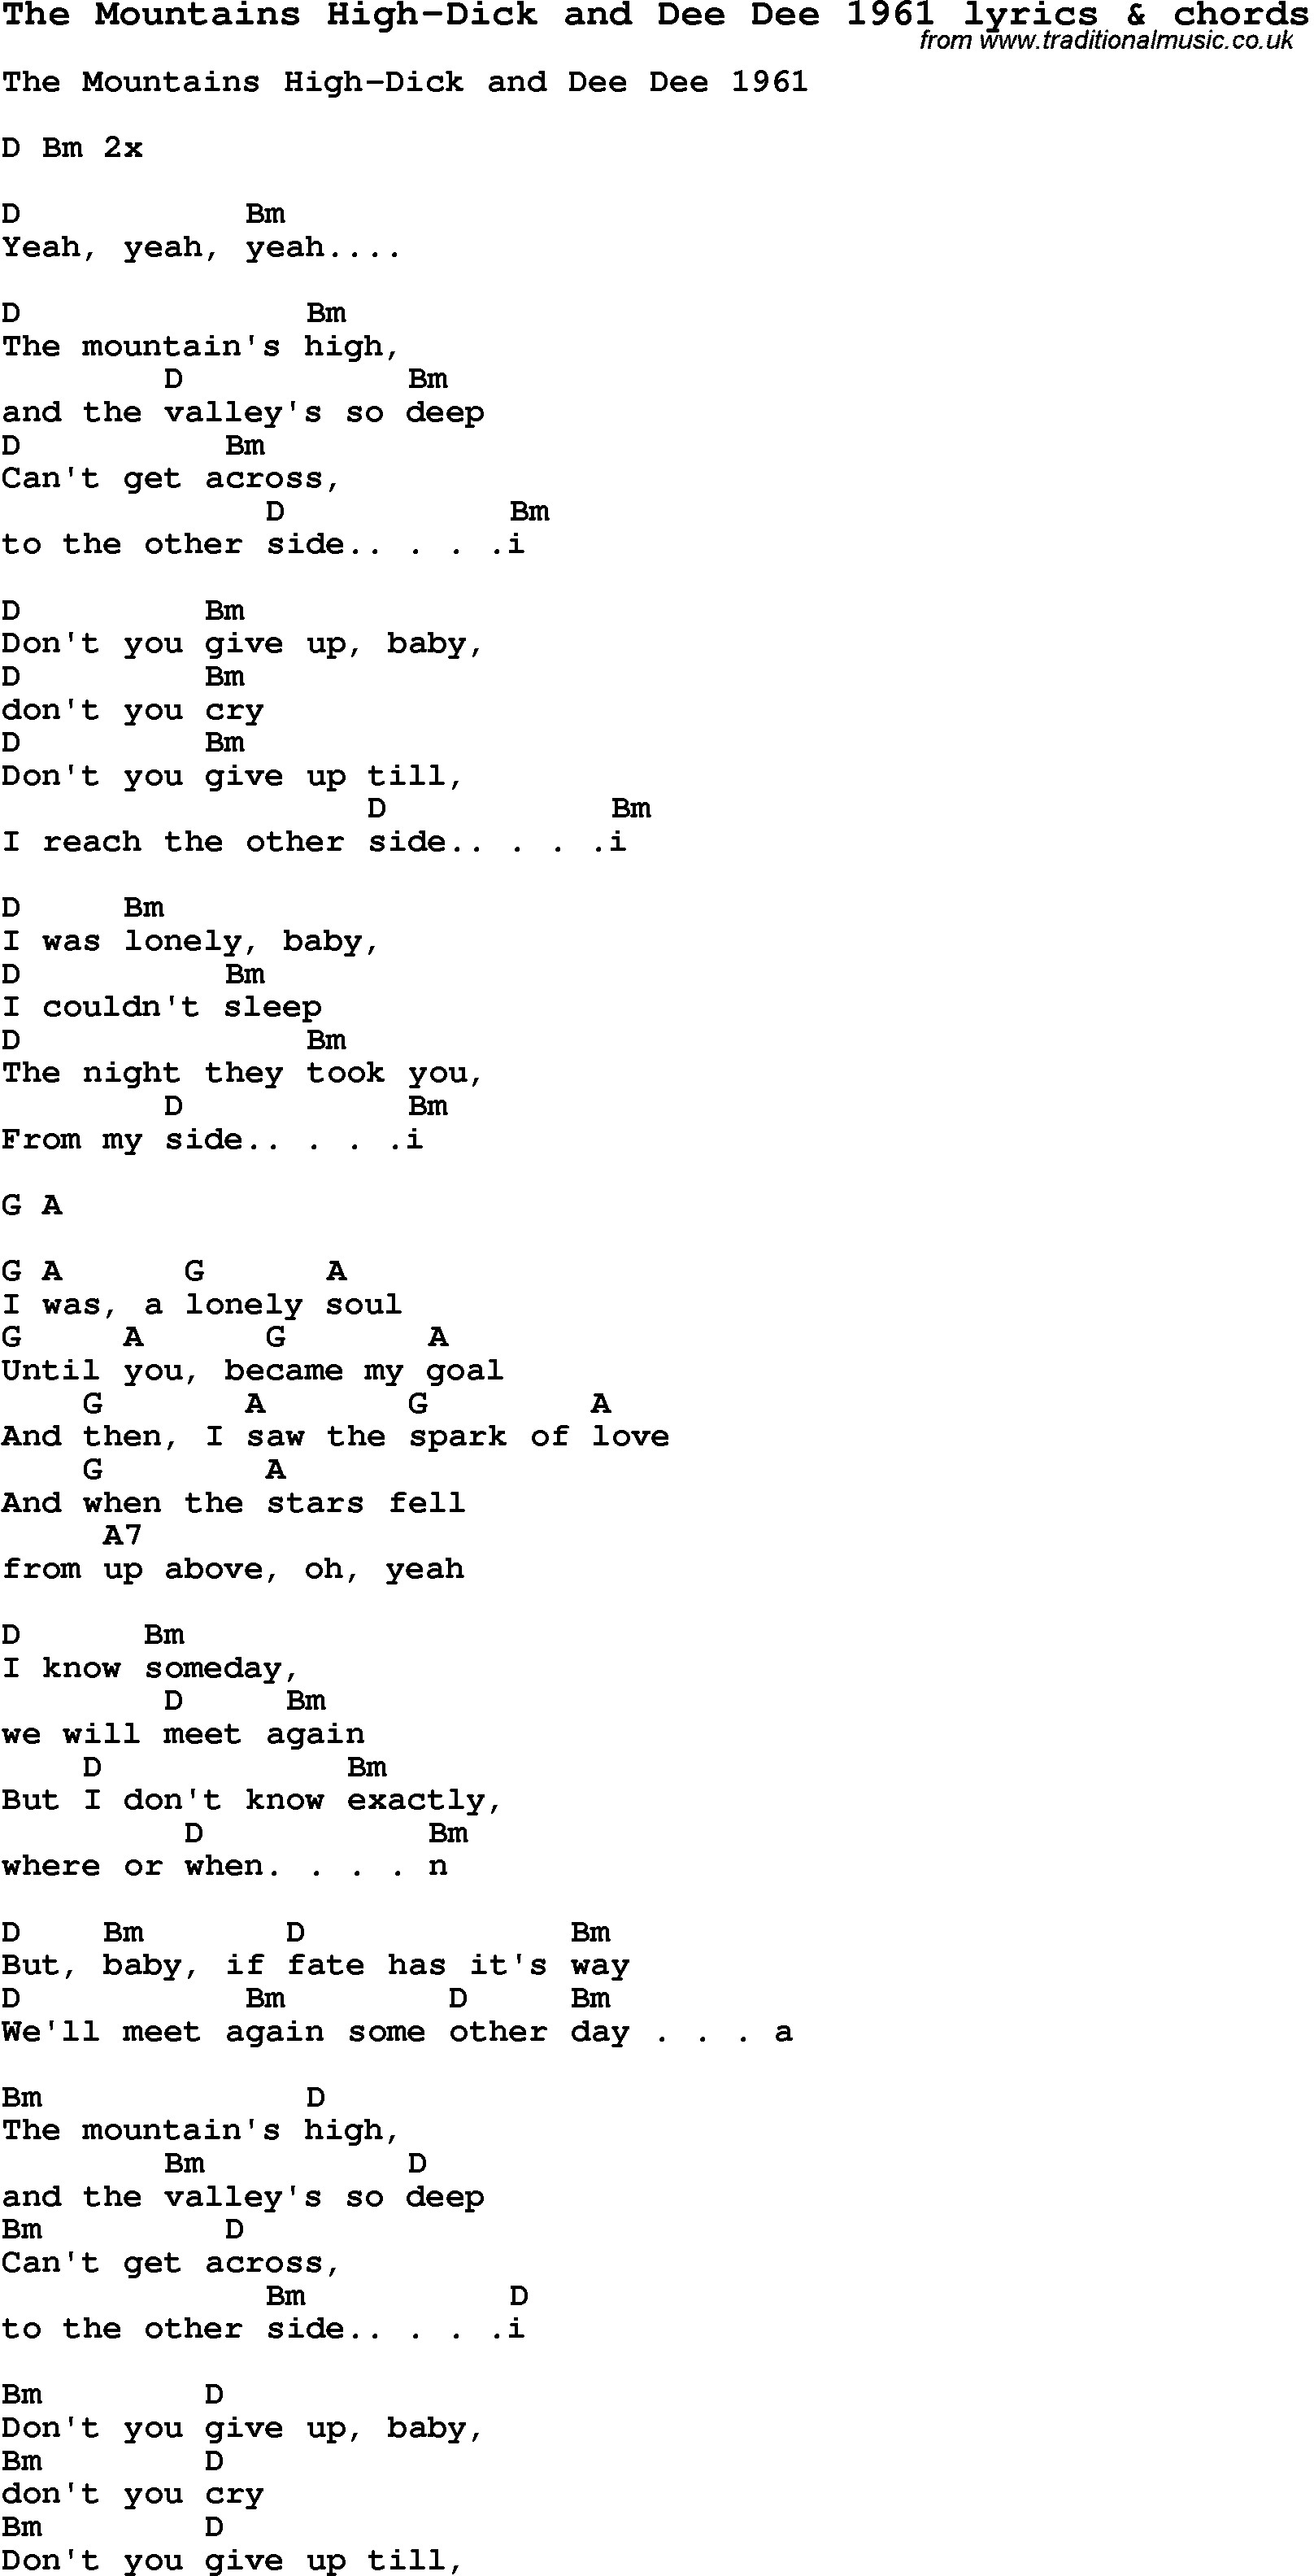 Love Song Lyrics for: The Mountains High-Dick and Dee Dee 1961 with chords for Ukulele, Guitar Banjo etc.